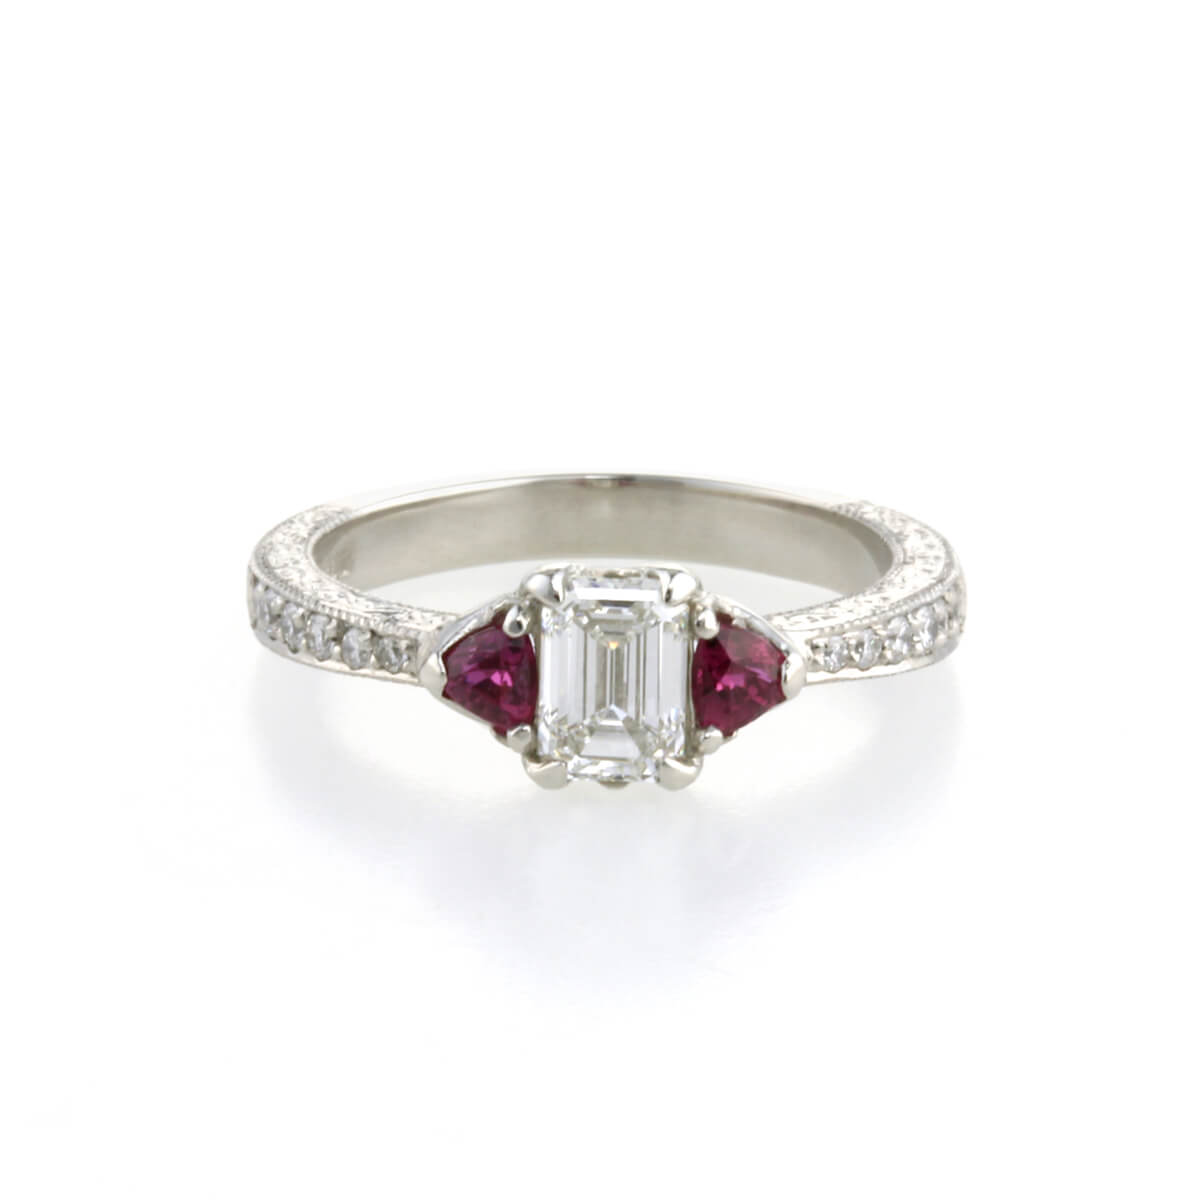 Platinum lotus flower engagement ring set with diamonds and rubies